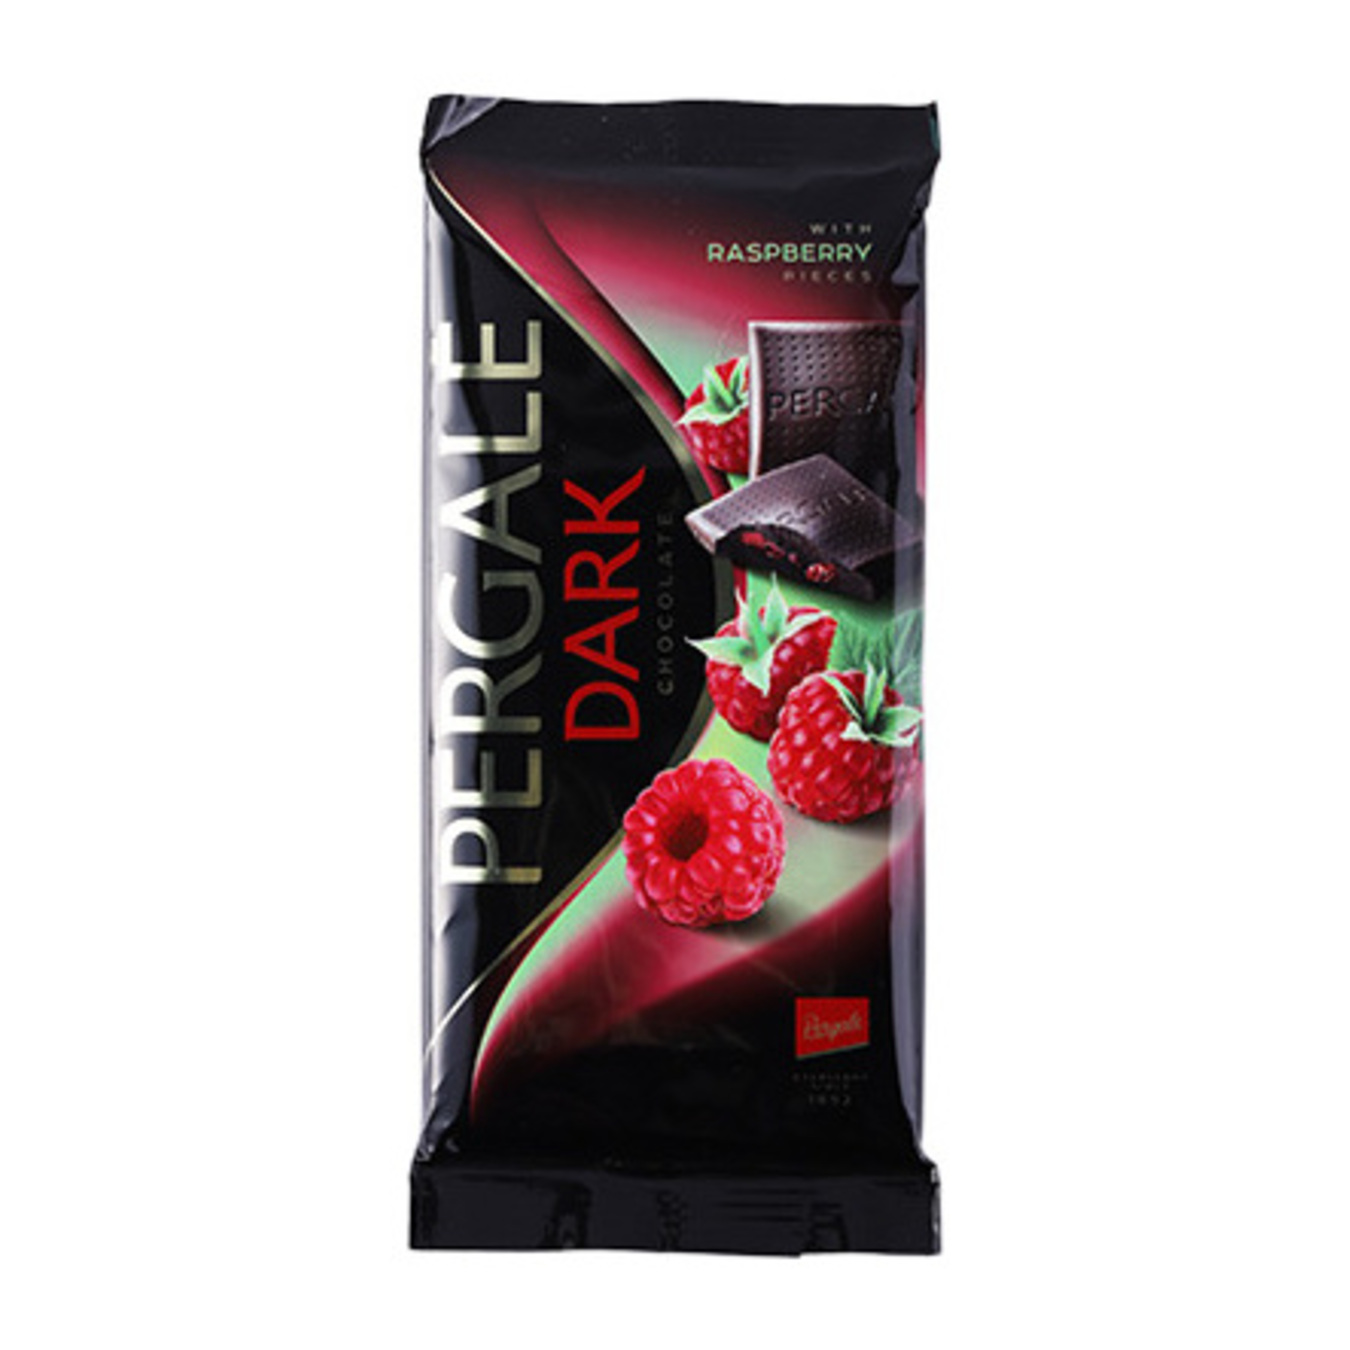 Black Chocolate Pergale with Raspberry Pieces 93g